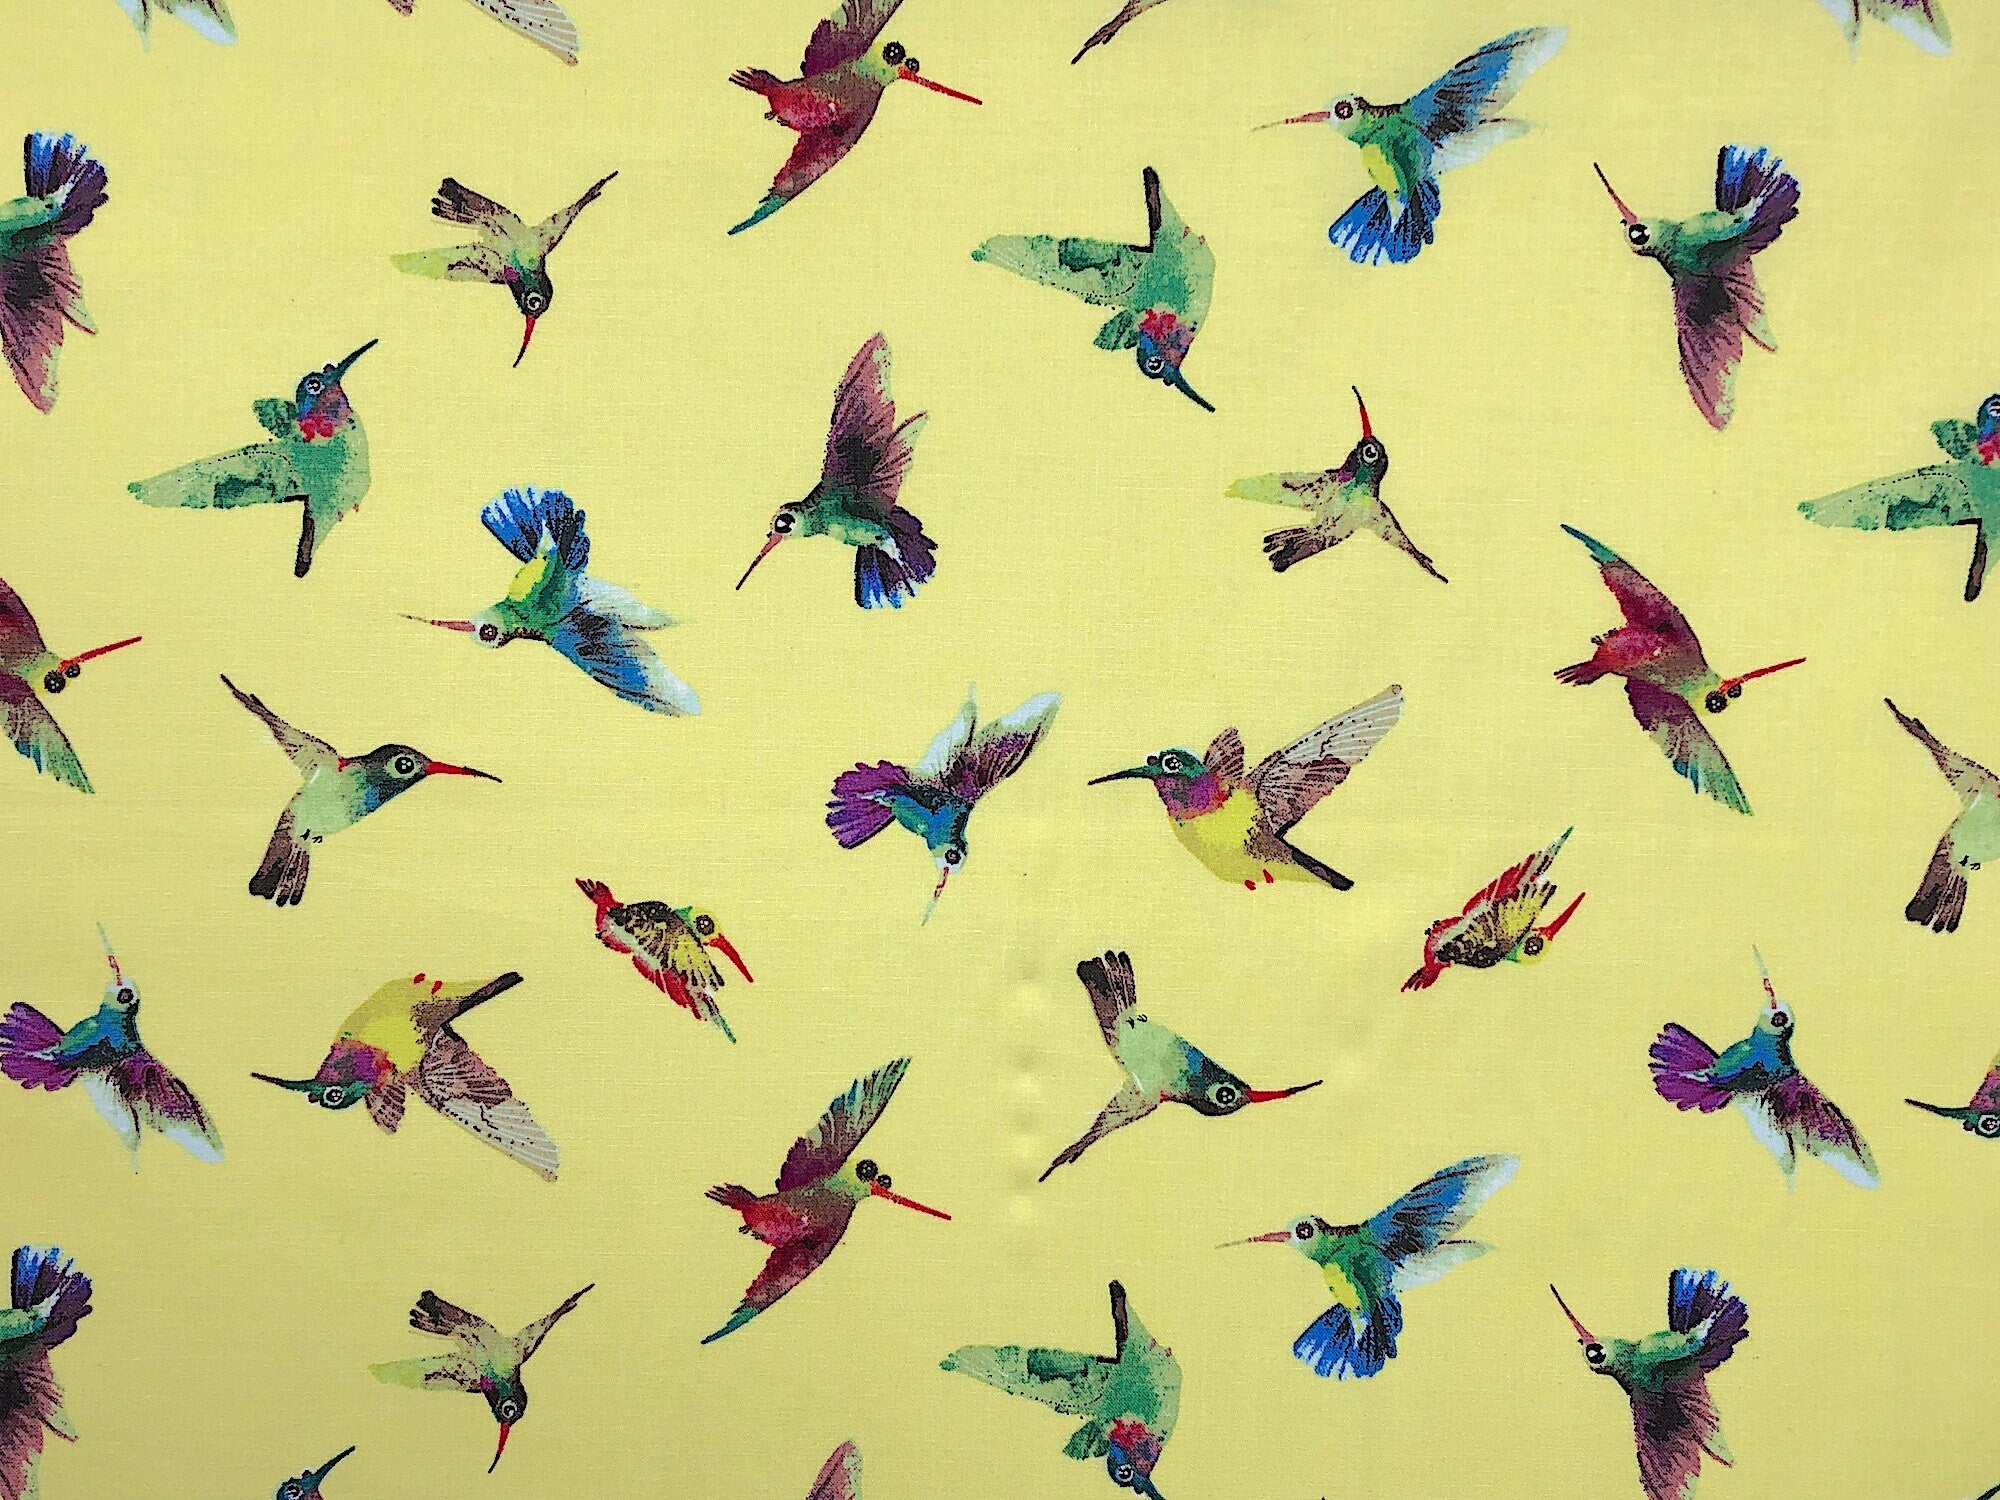 This fabric is part of the Flower Talk collection and is covered with colorful hummingbirds. The yellow background is covered with hummingbirds that are shades of blue, green, yellow, red and purple